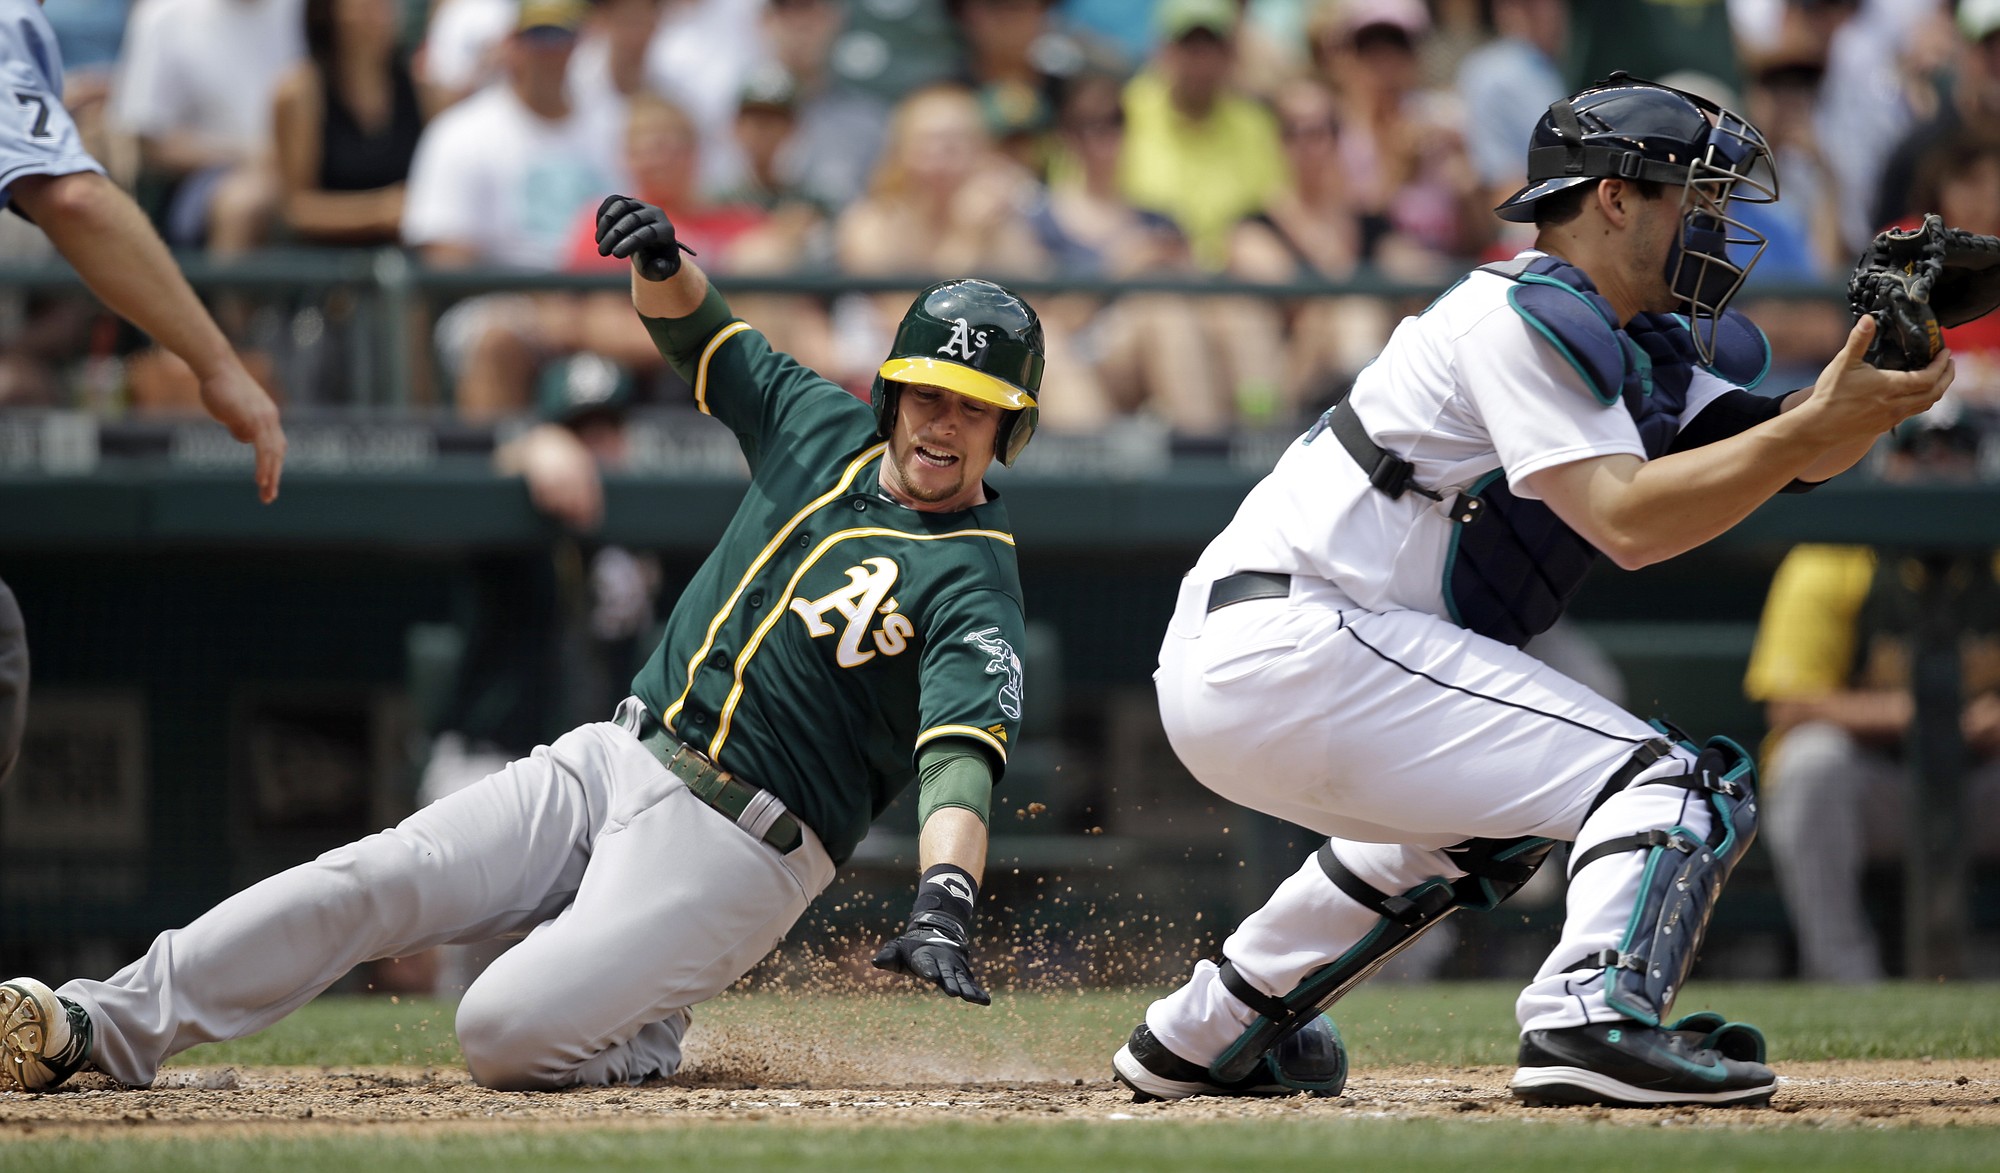 Oakland Athletics' Jed Lowrie, left, scores as Seattle Mariners catcher Mike Zunino waits for the ball in the fifth inning of a baseball game Sunday, July 13, 2014, in Seattle.